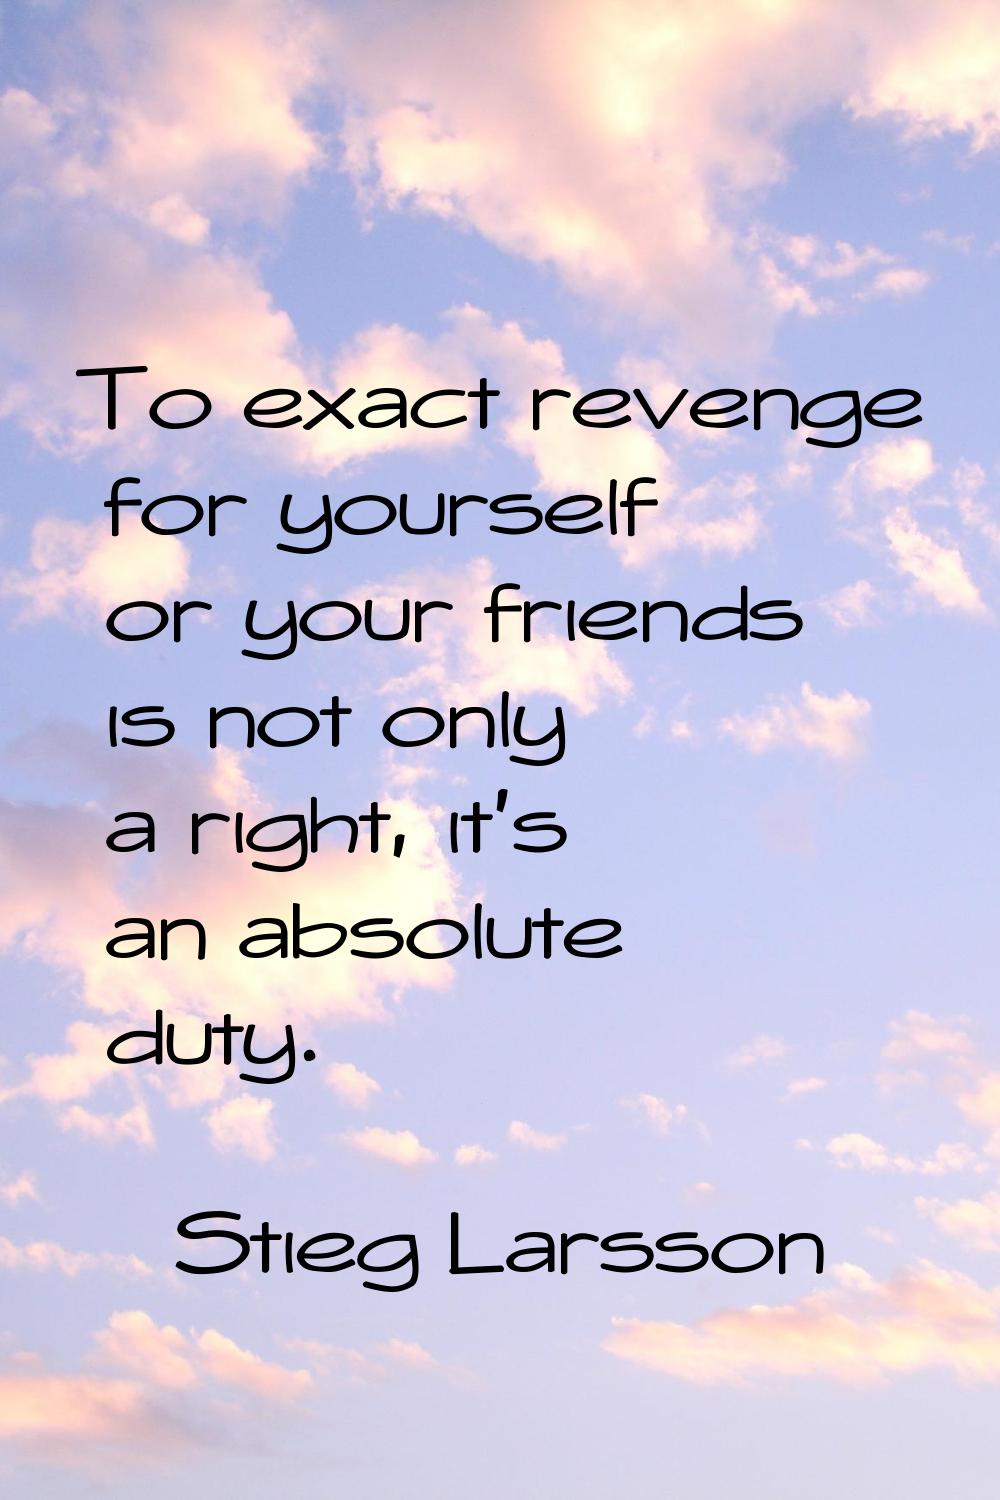 To exact revenge for yourself or your friends is not only a right, it's an absolute duty.